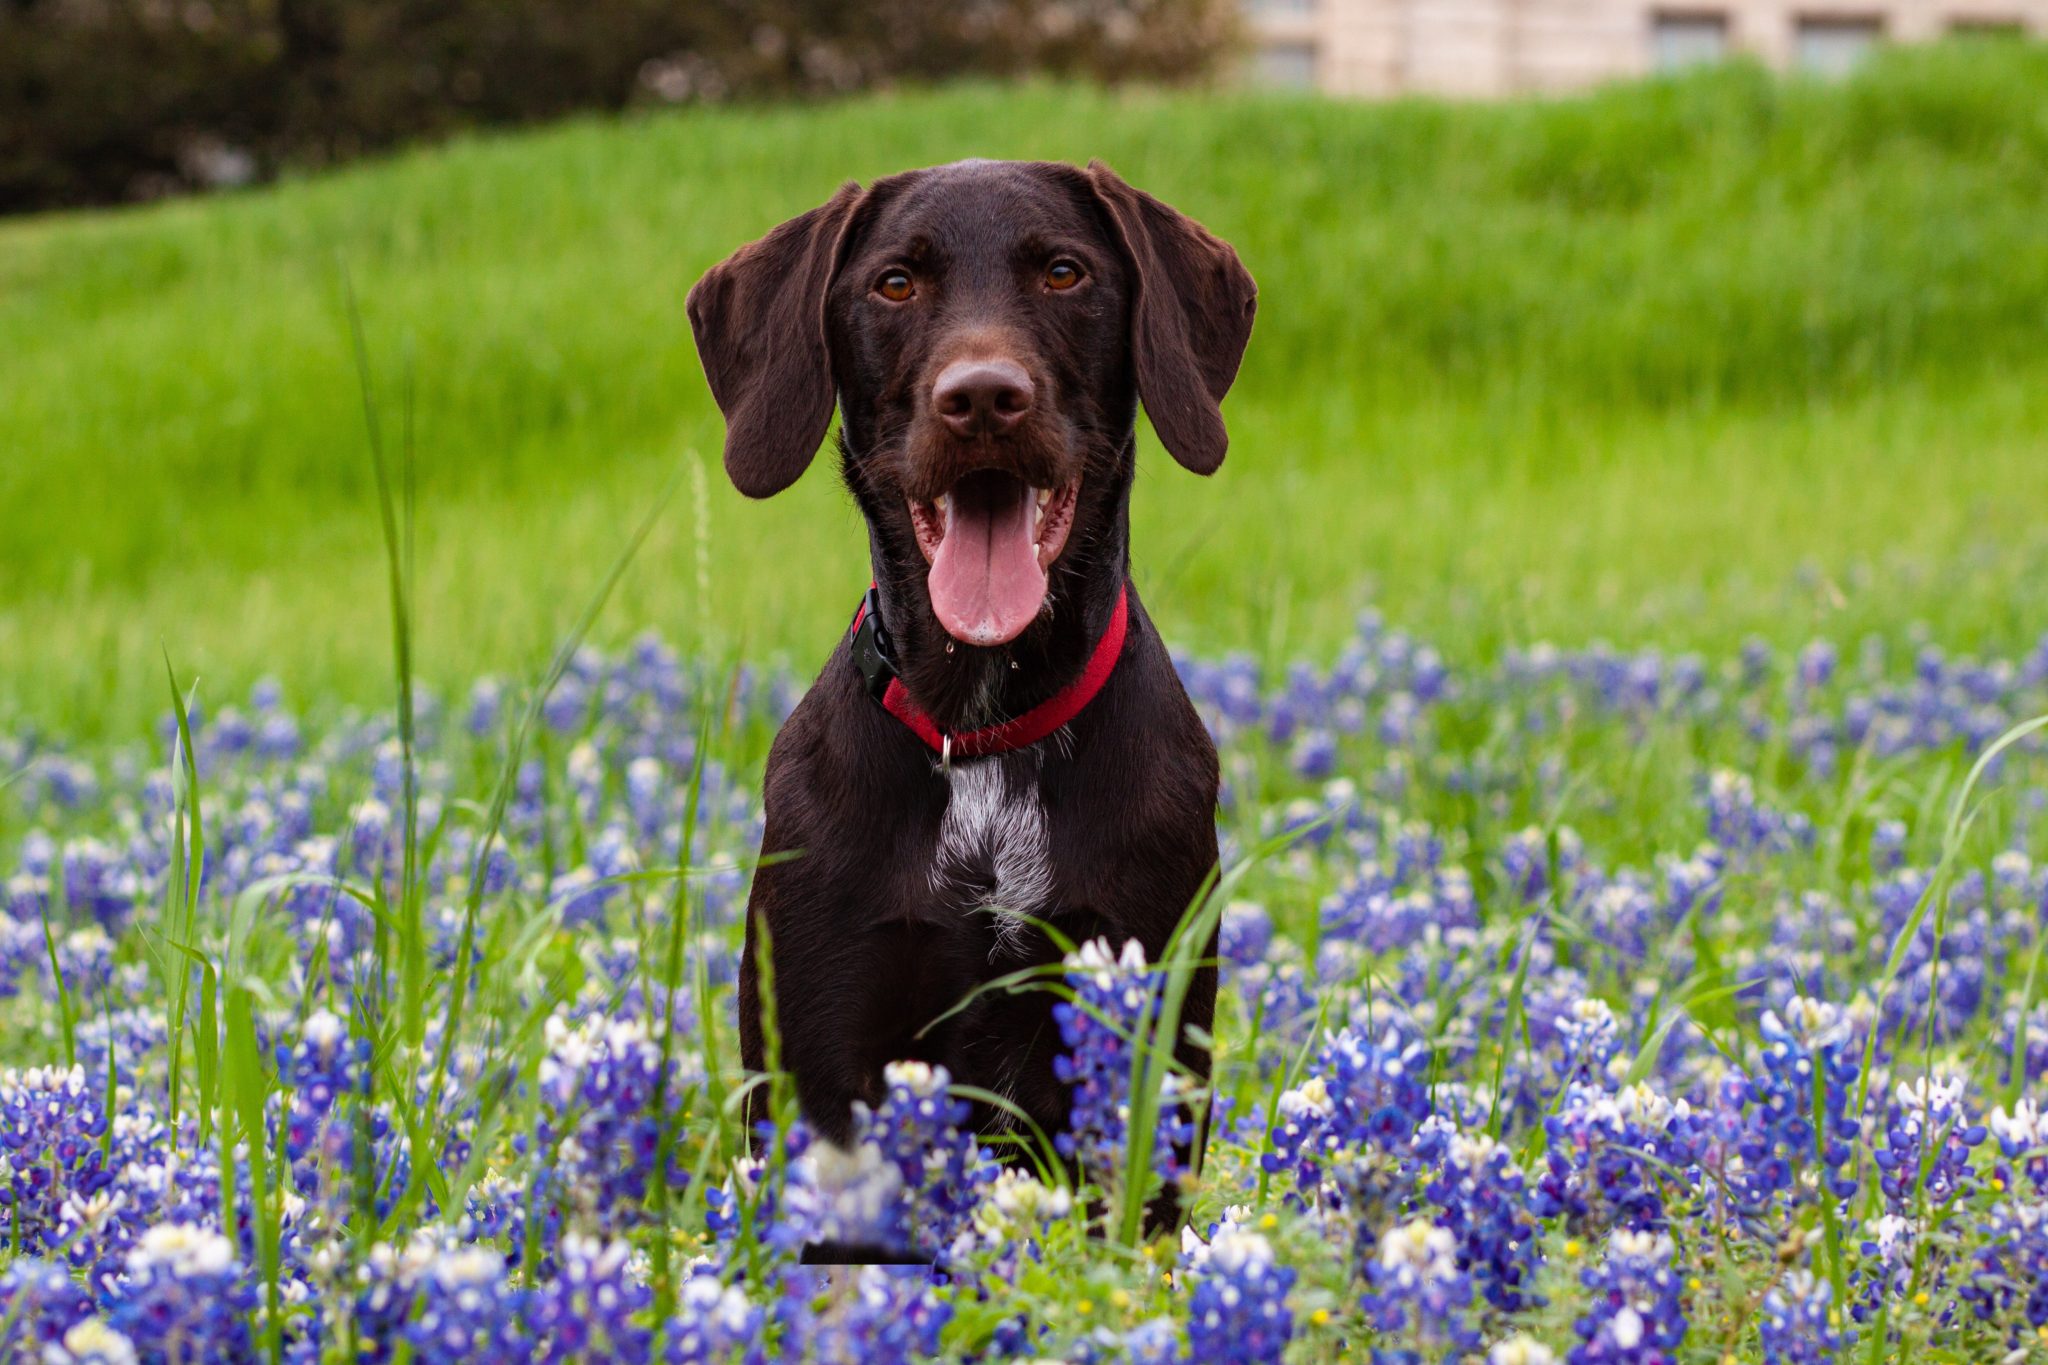 chocolate labrador dog sitting with tongue out in field of texas bluebonnet flowers